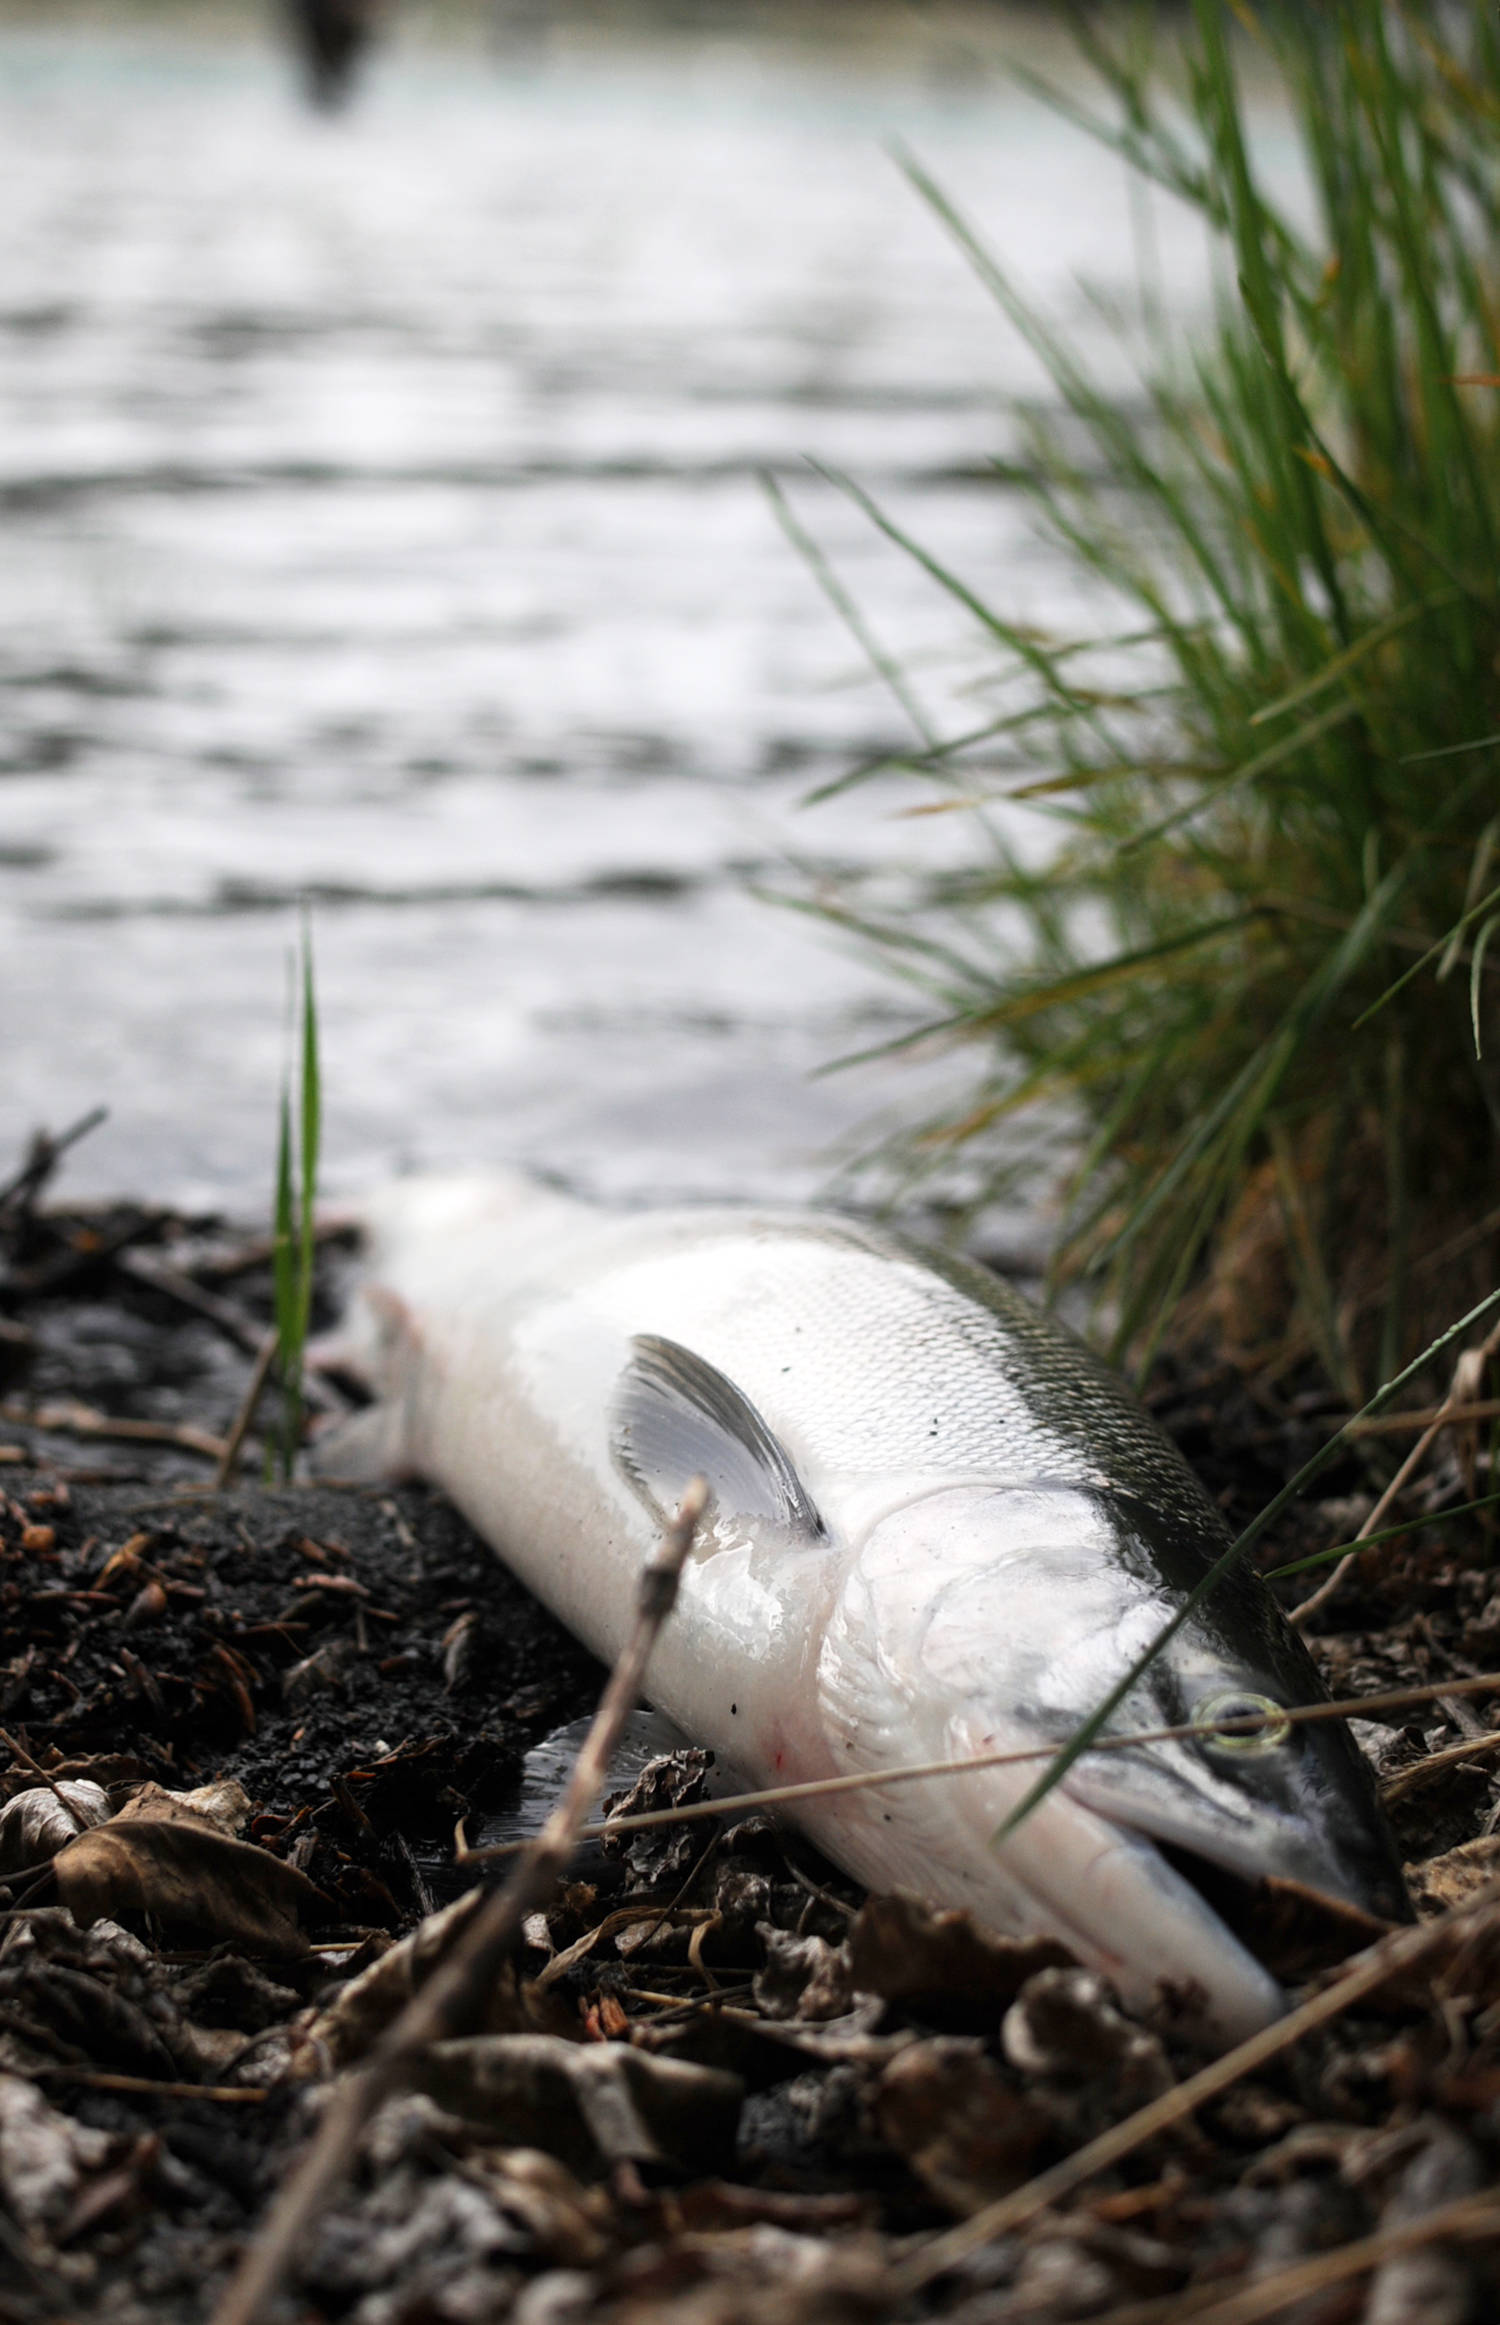 A sockeye salmon hooked by a lucky angler rests on the bank of the Kenai River downstream of the confluence with the Russian River on Sunday, June 11, 2017 near Cooper Landing, Alaska. (Elizabeth Earl/Peninsula Clarion, file)